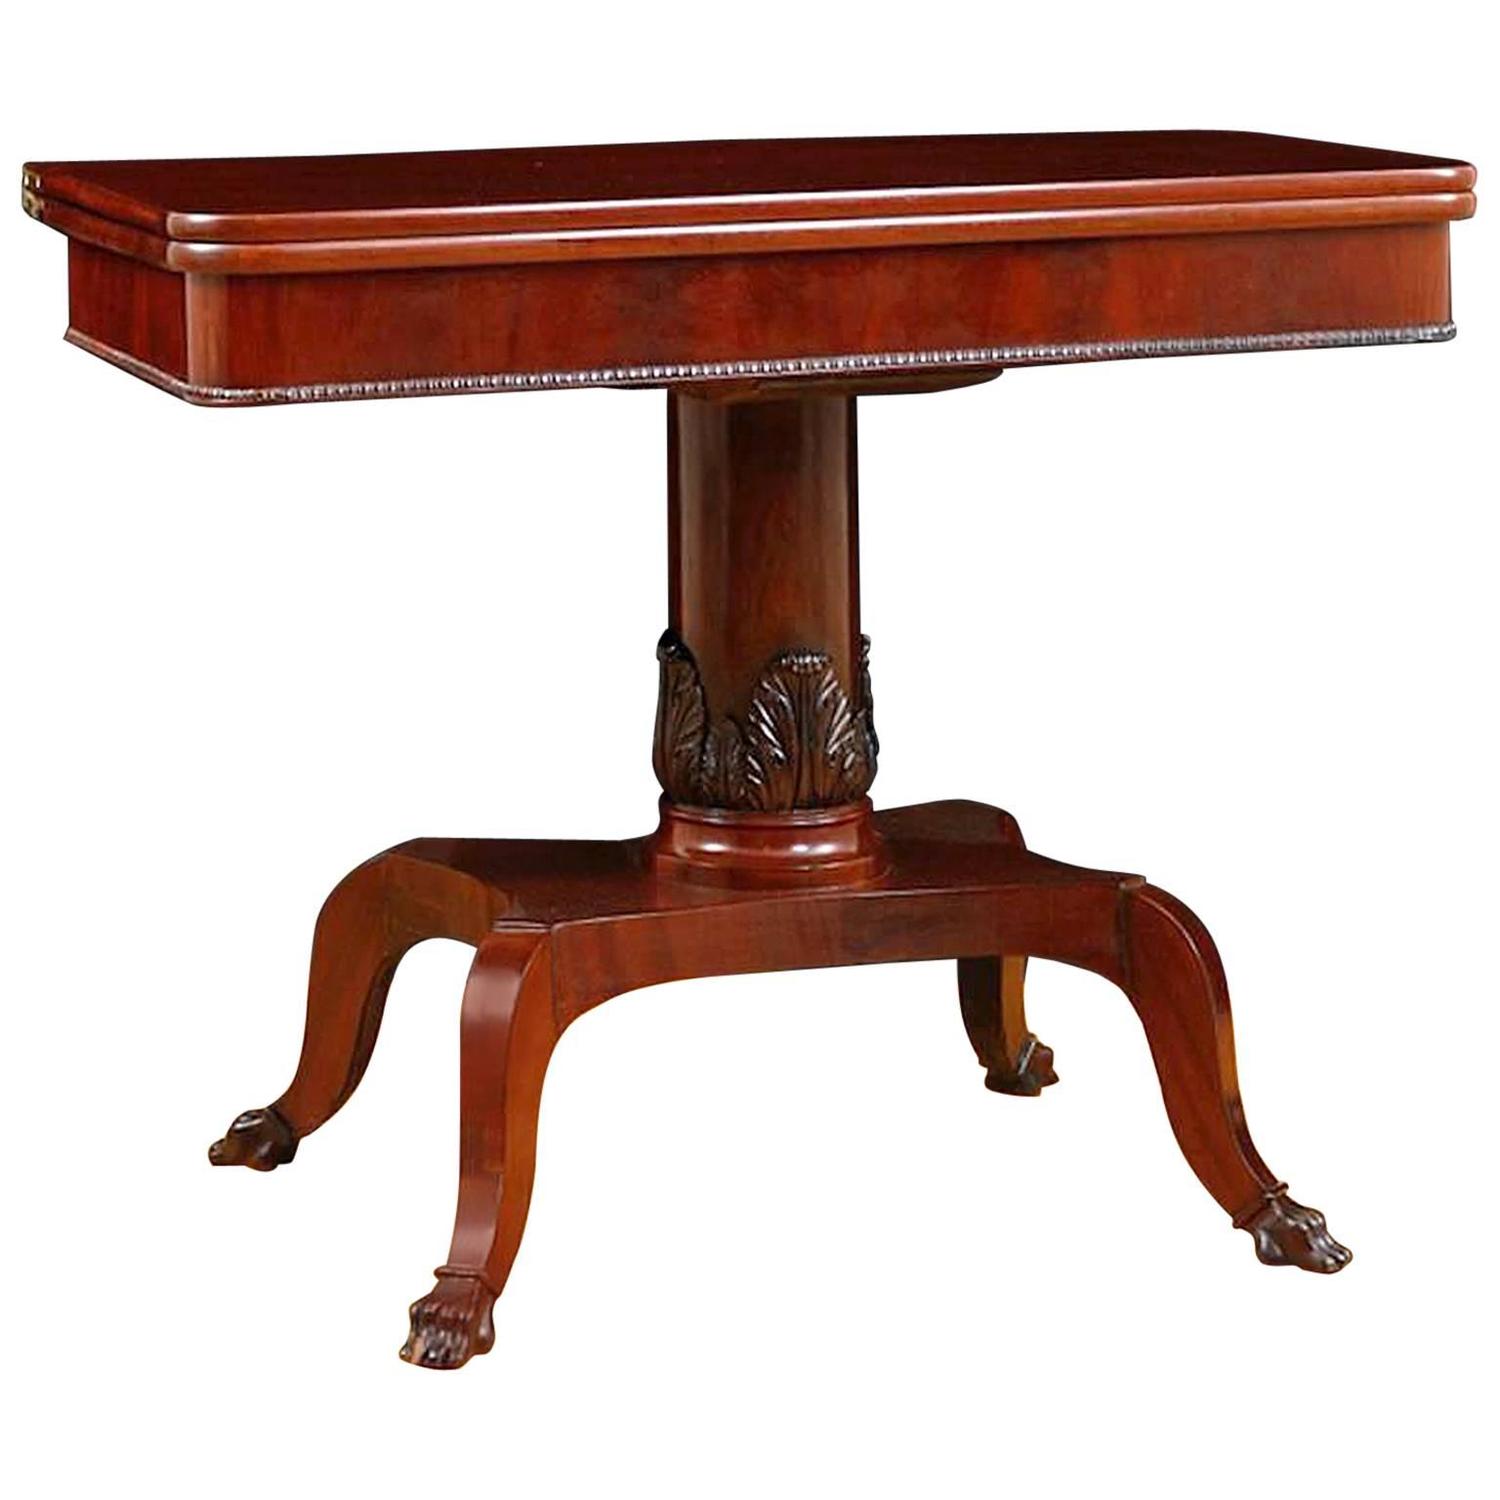 SHOP FOR VINTAGE CARD TABLES ONLINE - COMPARE PRICES, READ REVIEWS